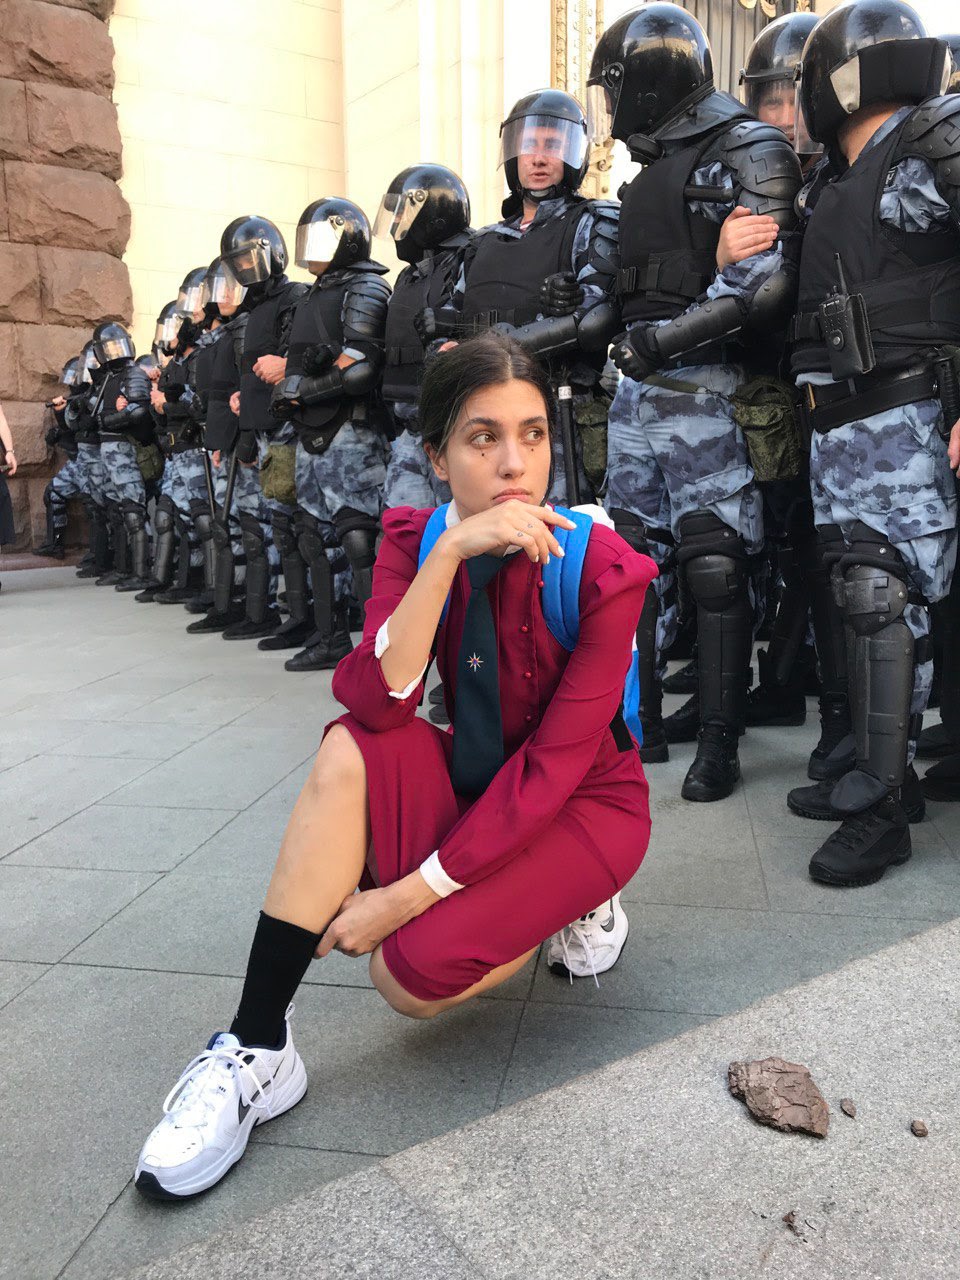 Russia Has Added Pussy Riot’s Nadya Tolokonnikova to Its Most-Wanted List, Claiming Her NFT Art Is ‘Obscene’